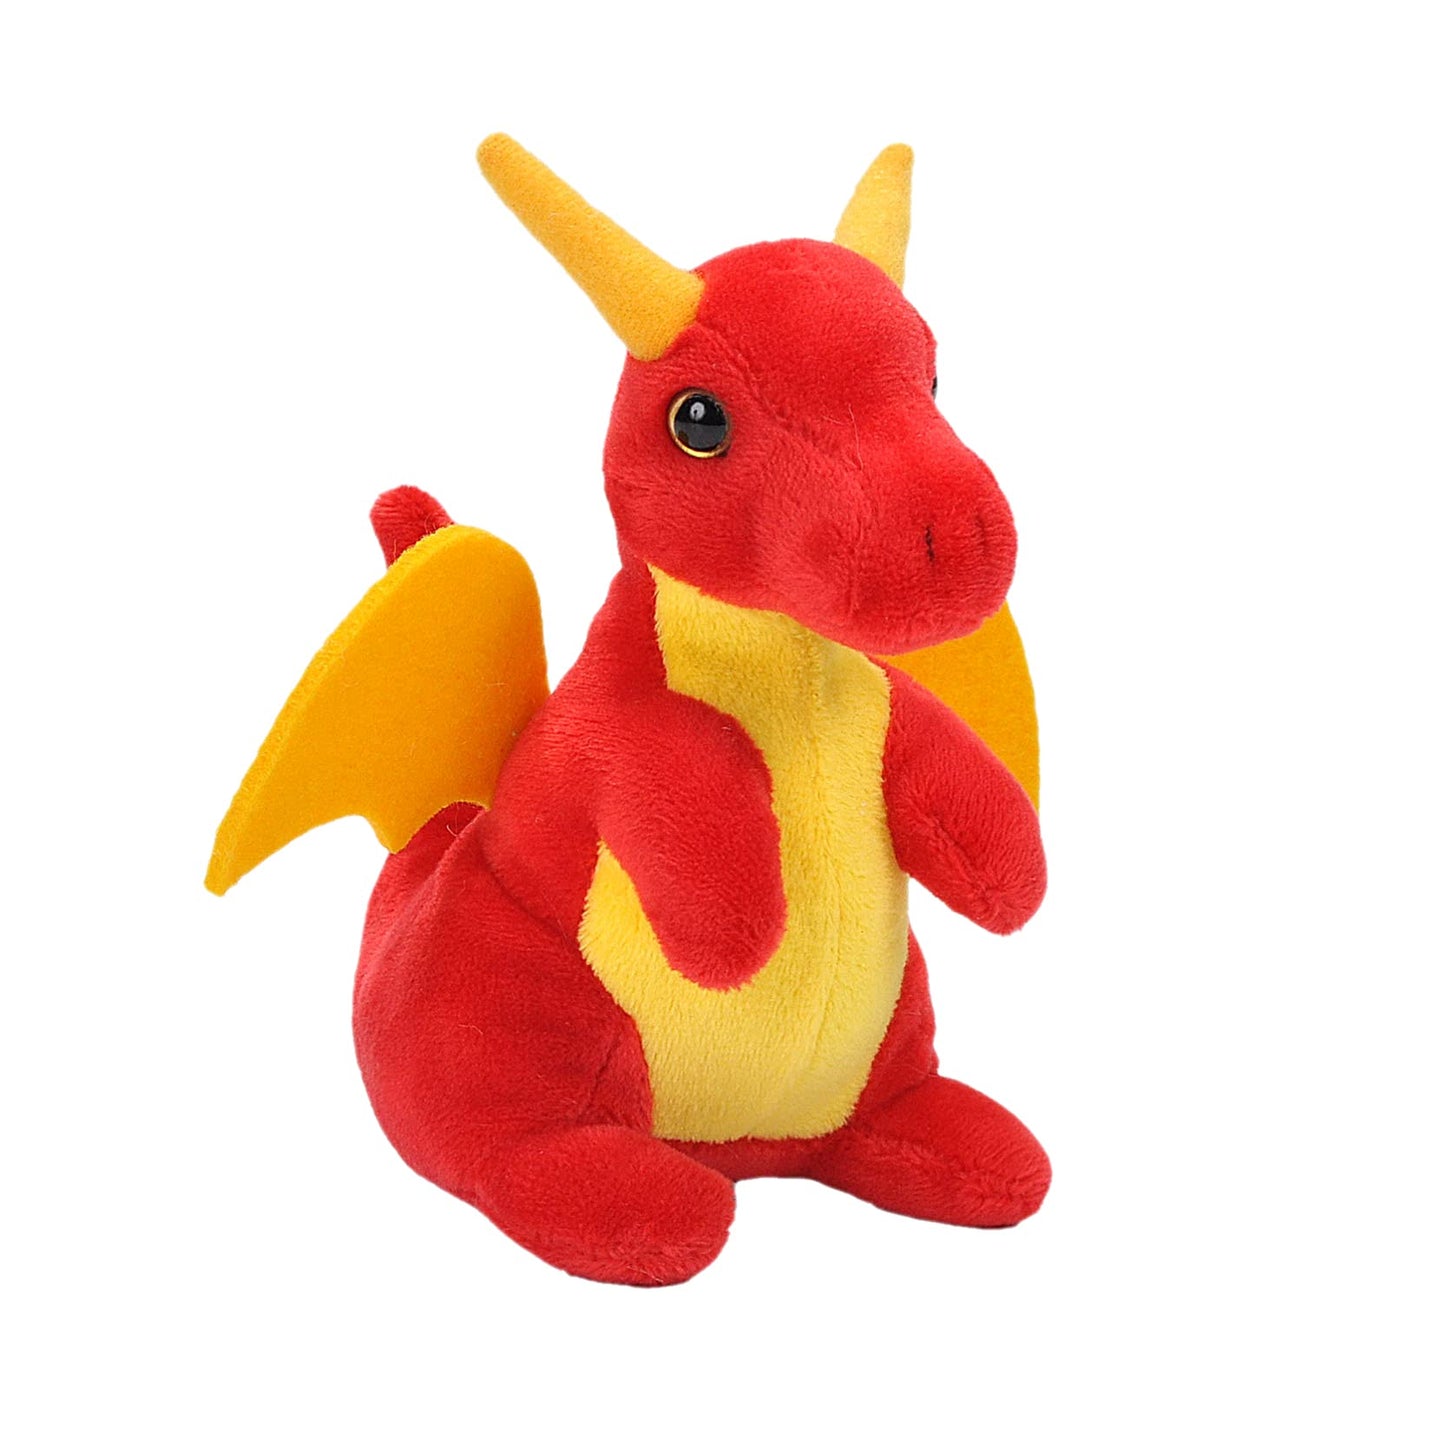 Wild Republic Pocketkins Eco Dragon, Stuffed Animal, 5 Inches, Plush Toy, Made from Recycled Materials, Eco Friendly